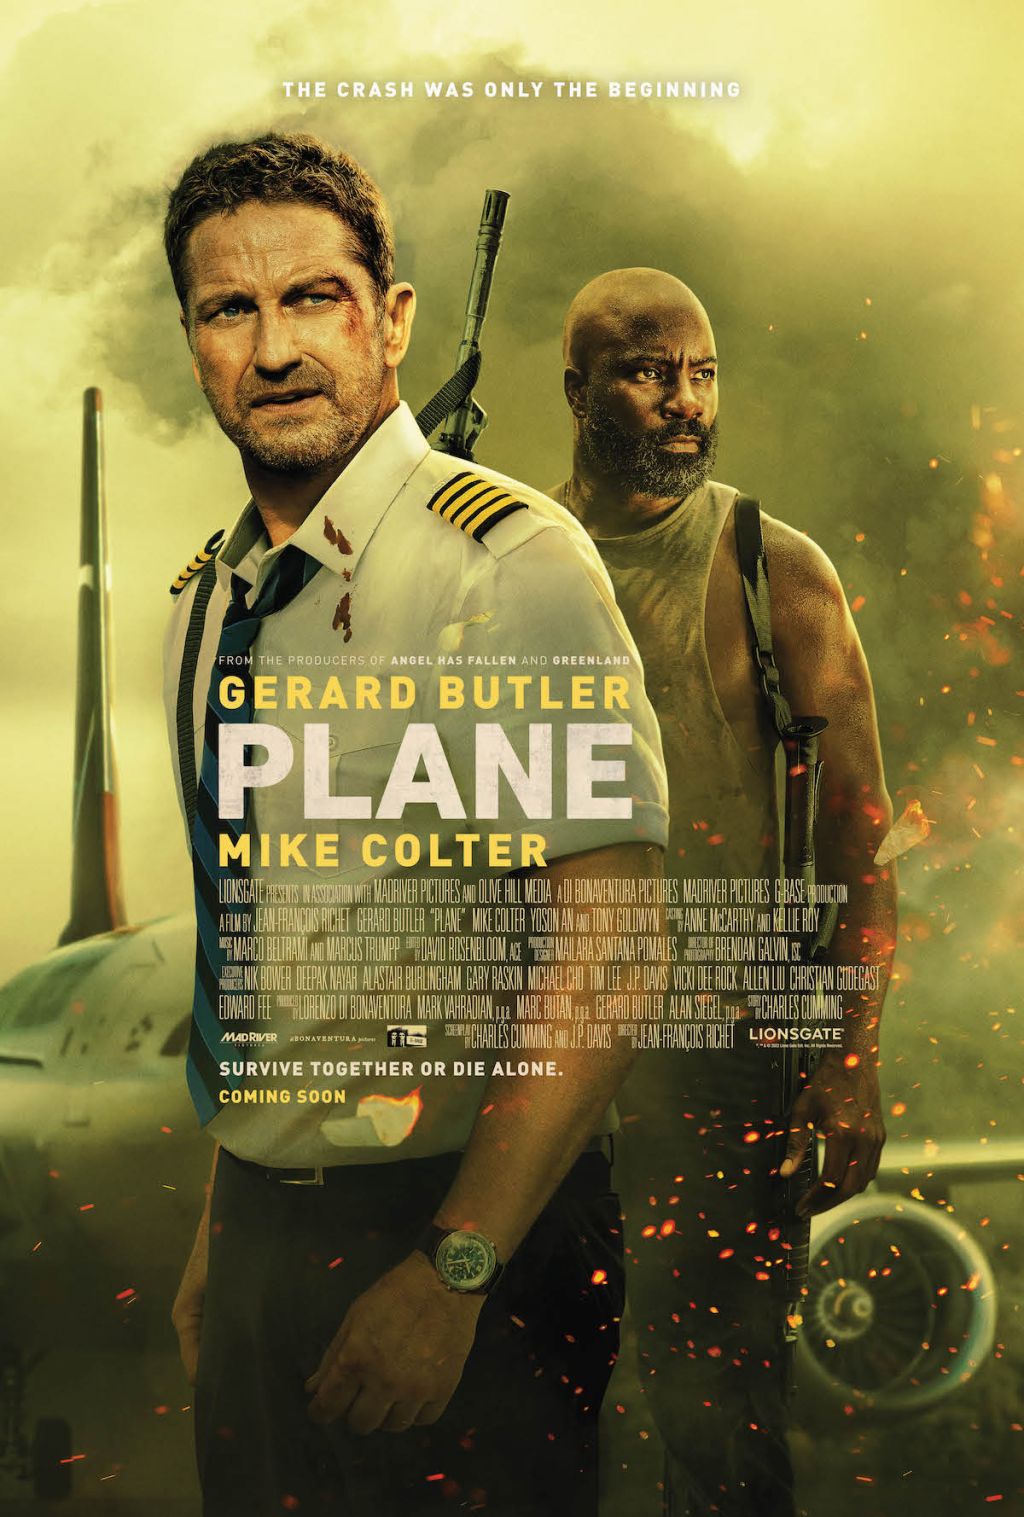 Plane production stills and poster